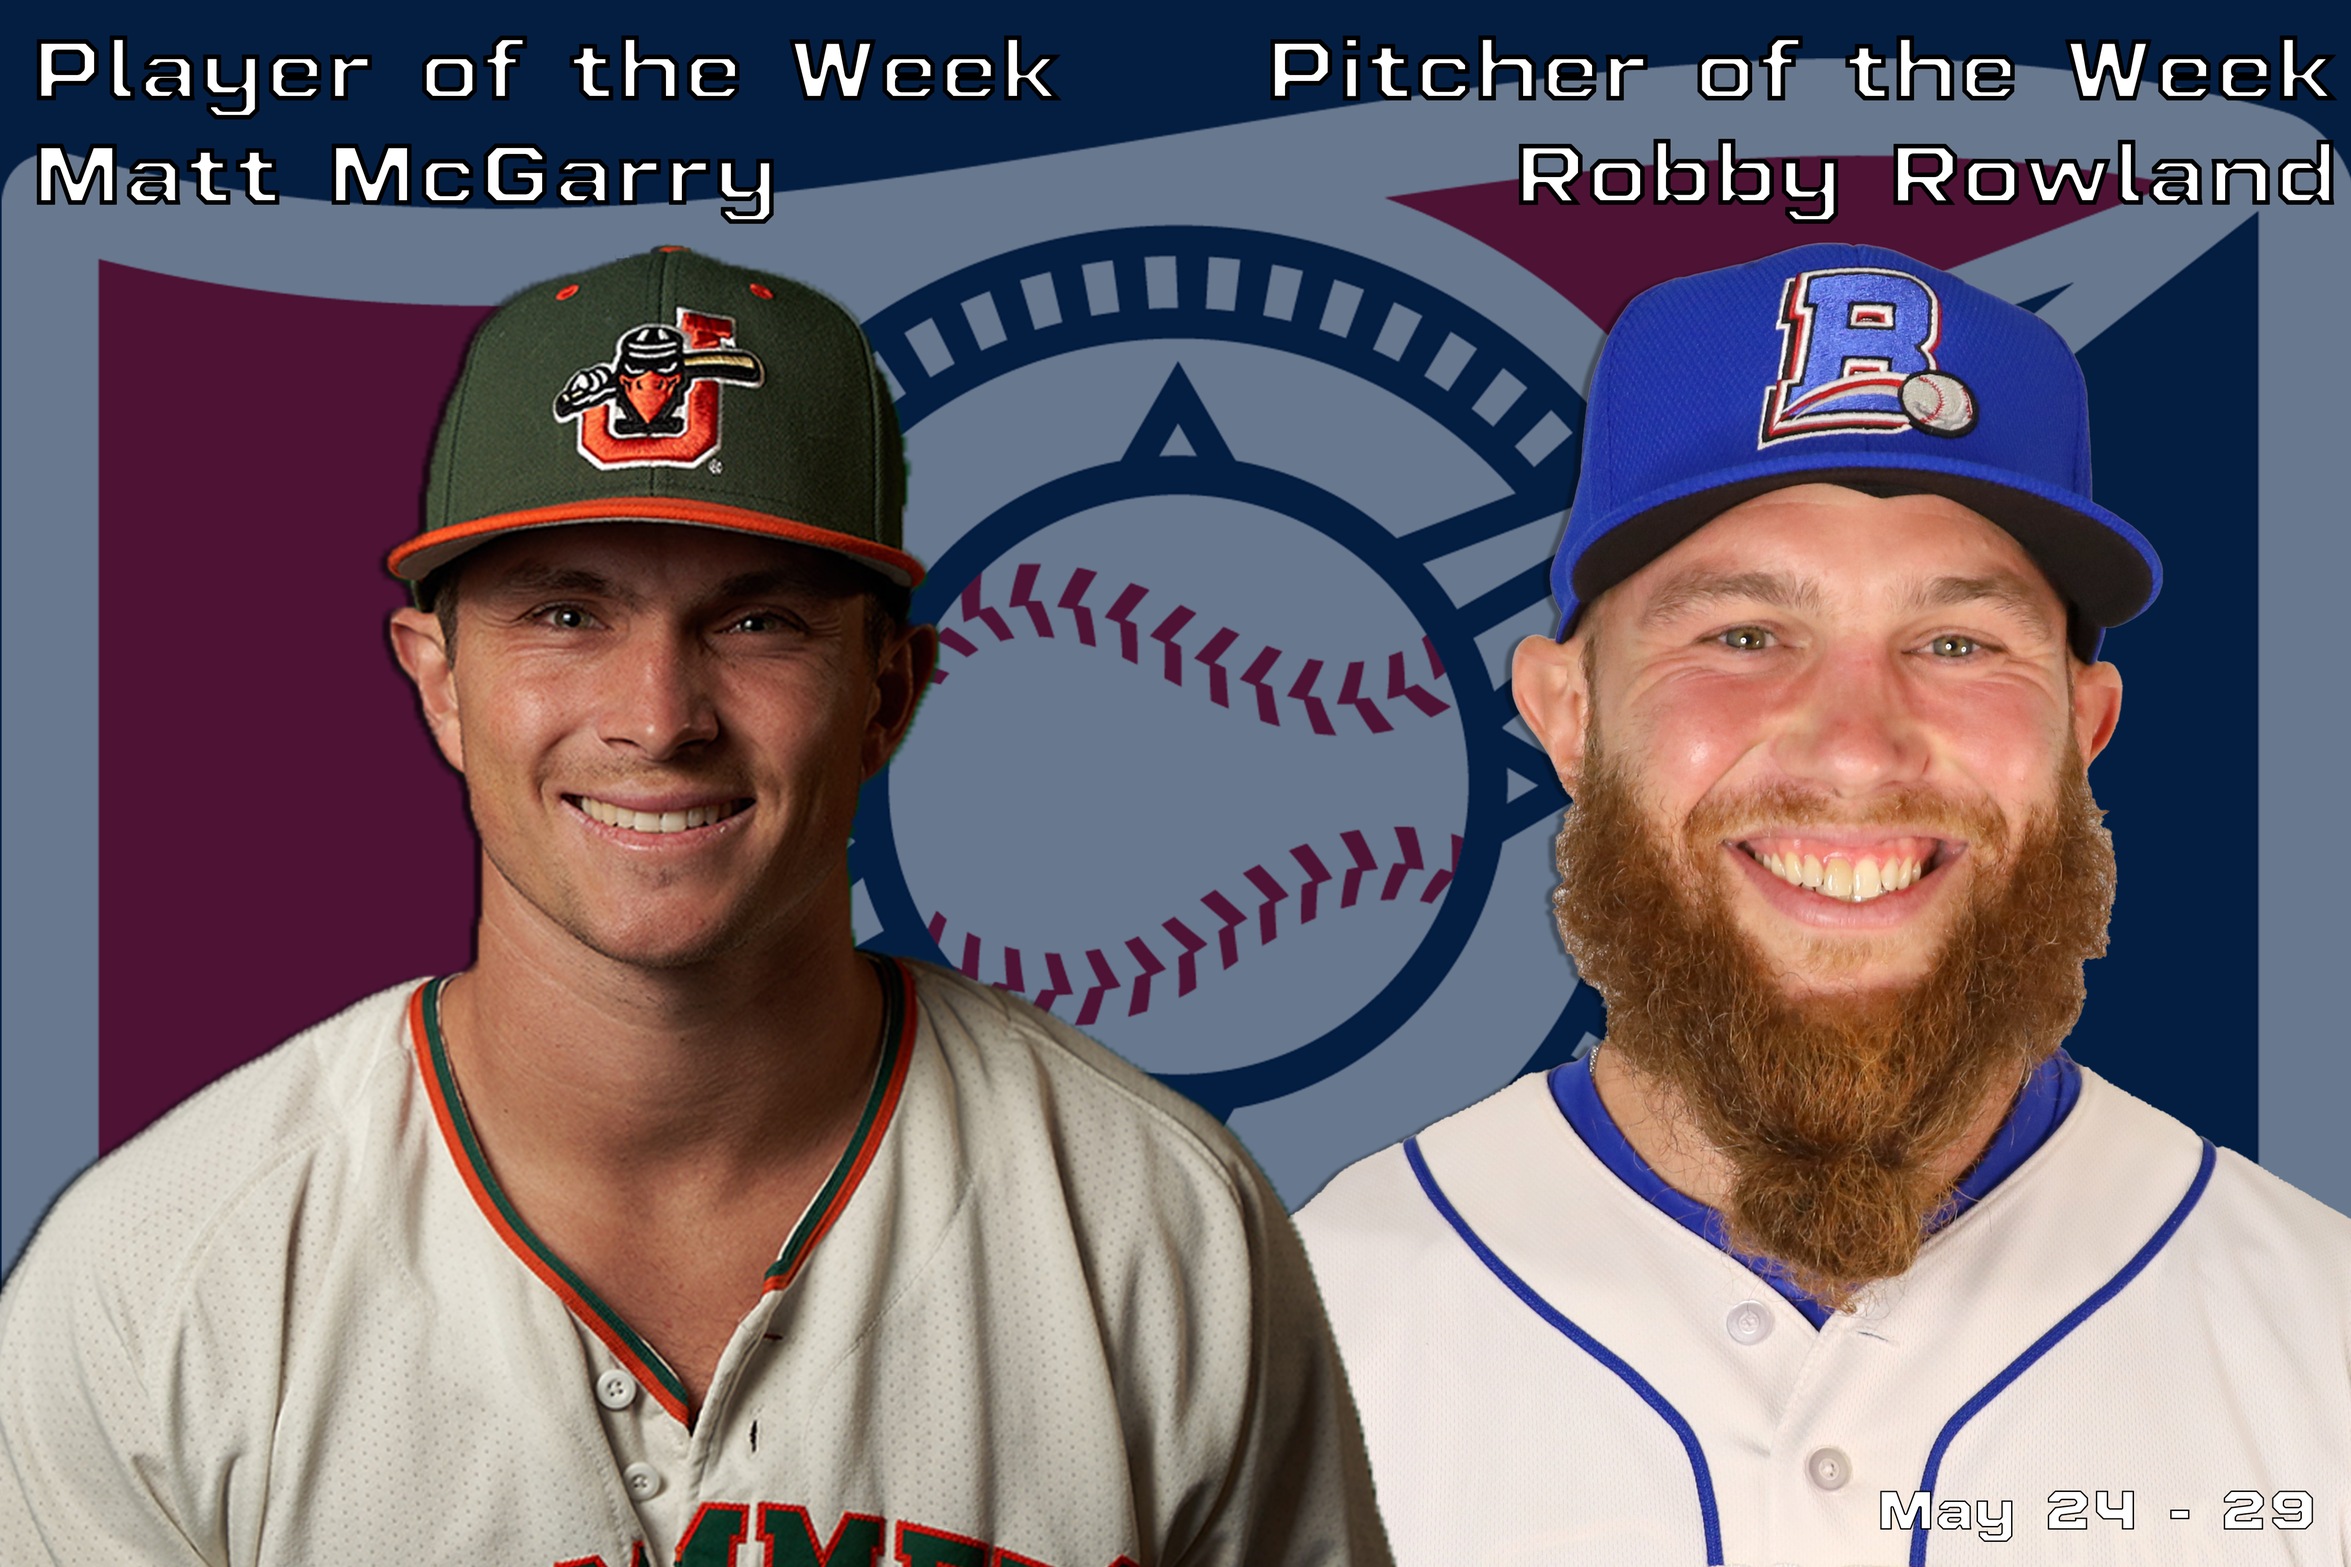 Joliet Slammers Matt McGarry and New York Boulders Robby Rowland take Player and Pitcher of the Week Awards